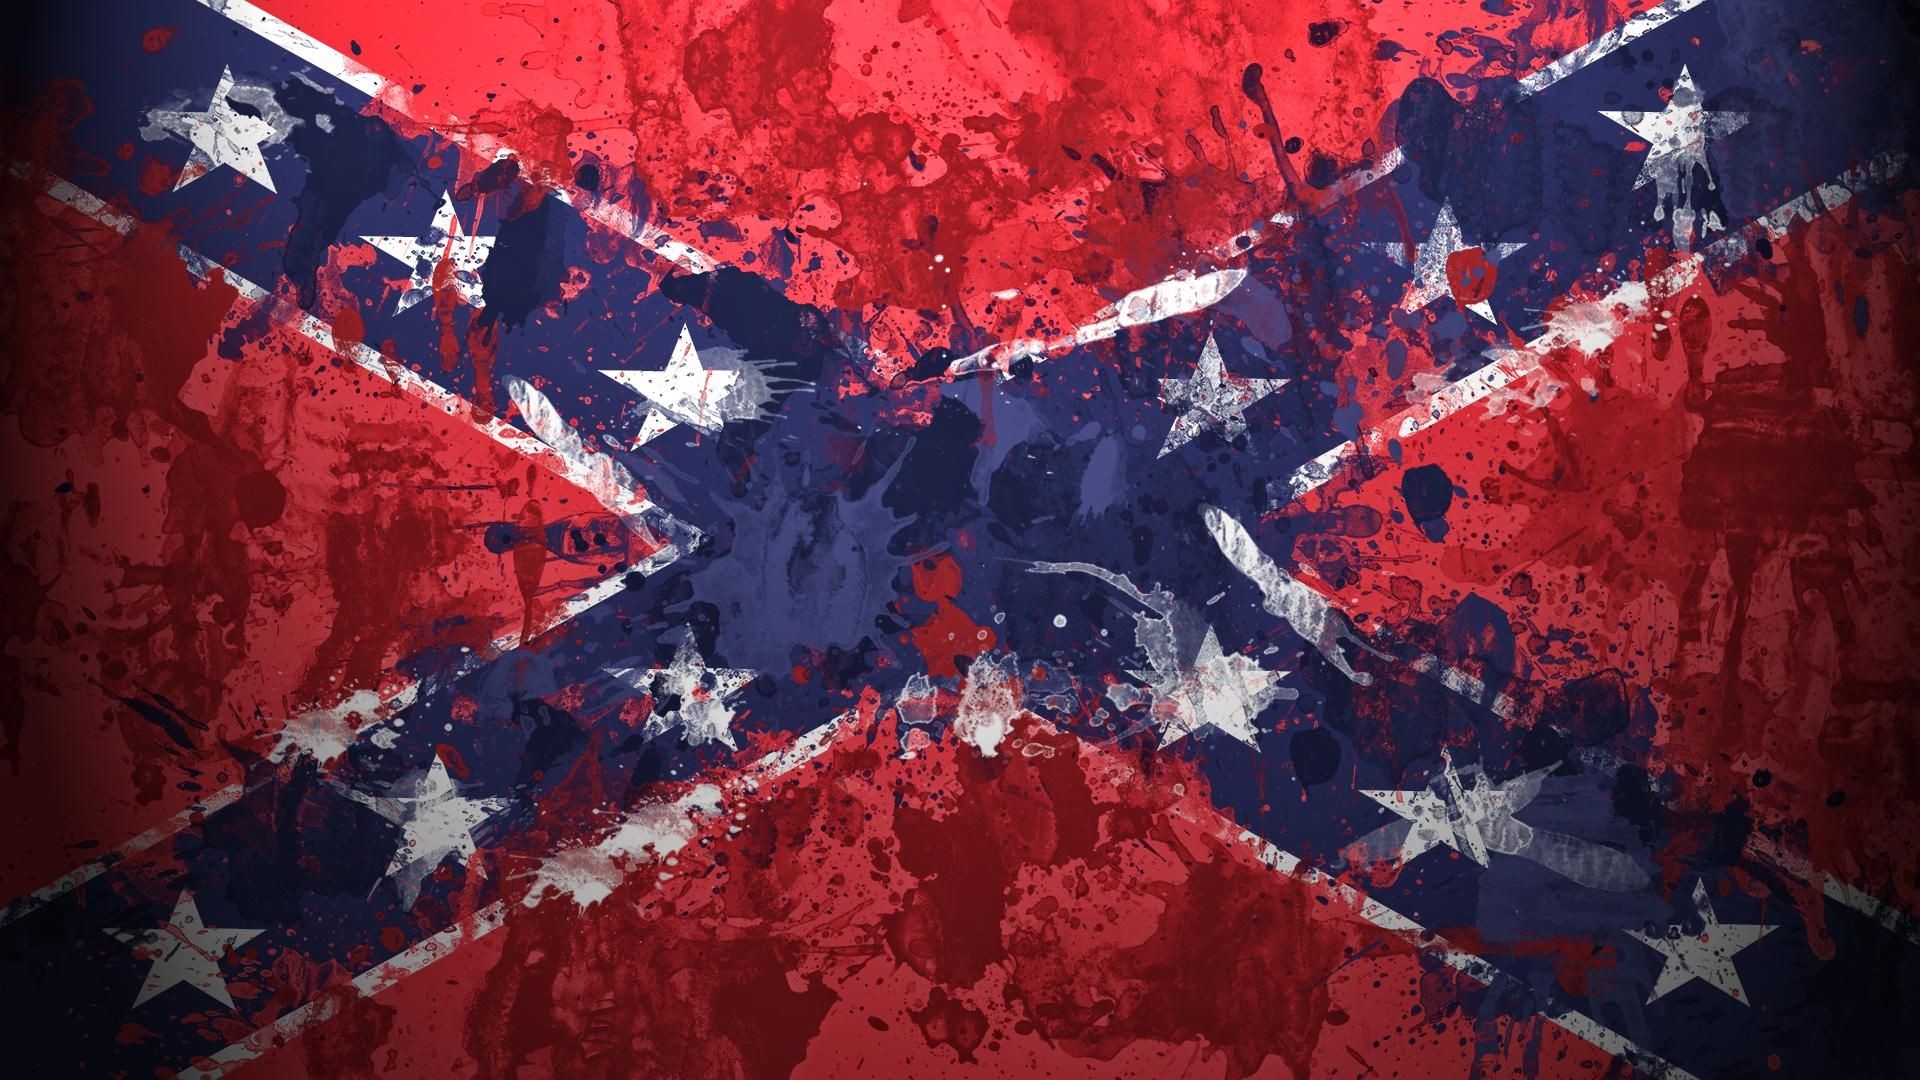 14691 Confederate Flag Background Images Stock Photos  Vectors   Shutterstock